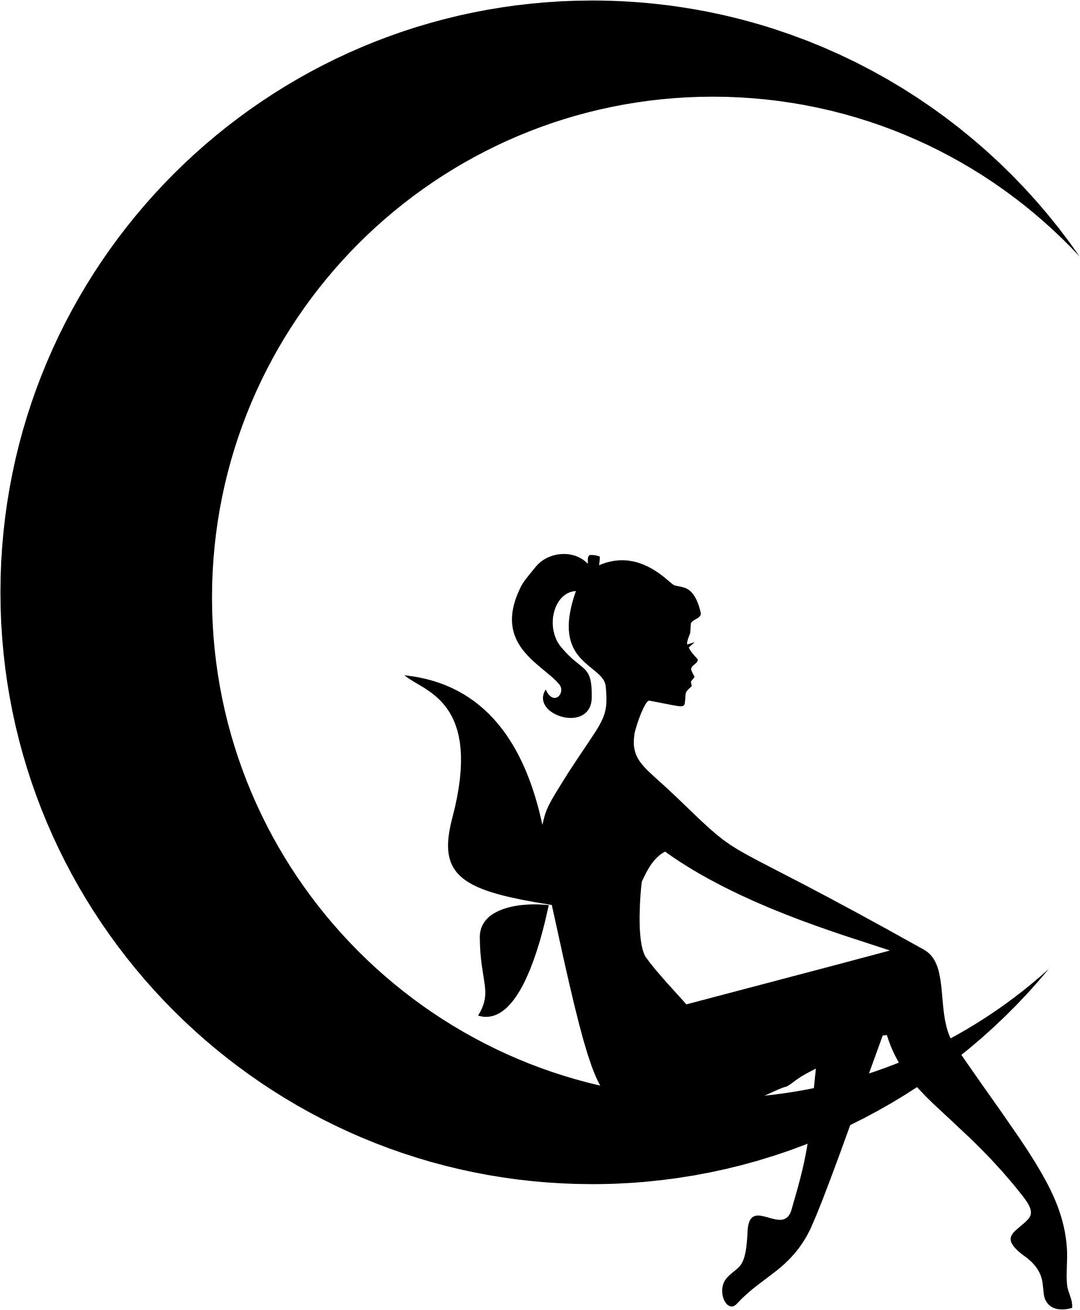 Fairy Relaxing On The Crescent Moon png transparent